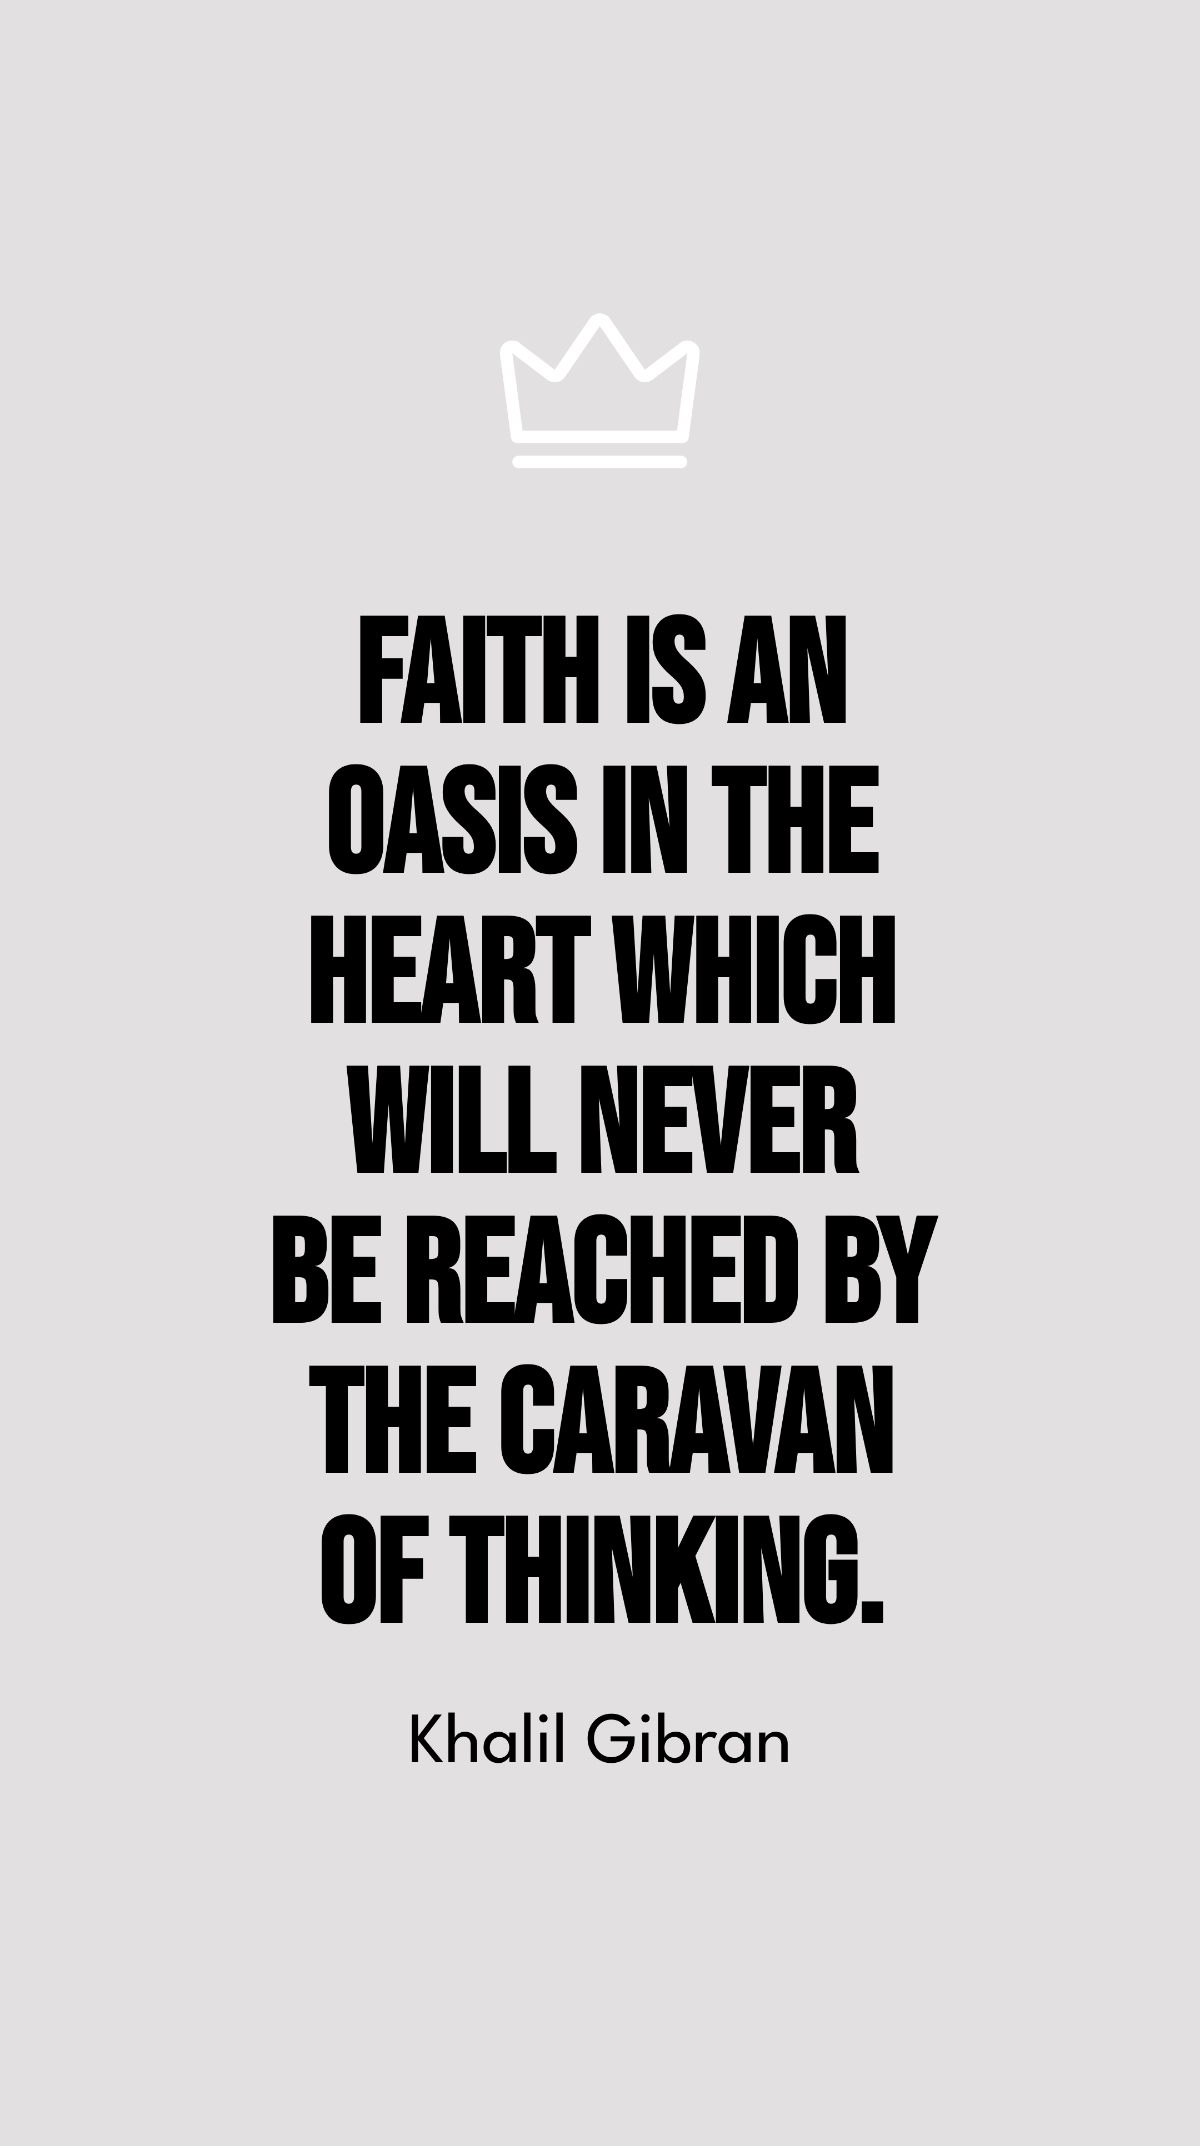 Khalil Gibran - Faith is an oasis in the heart which will never be reached by the caravan of thinking. Template